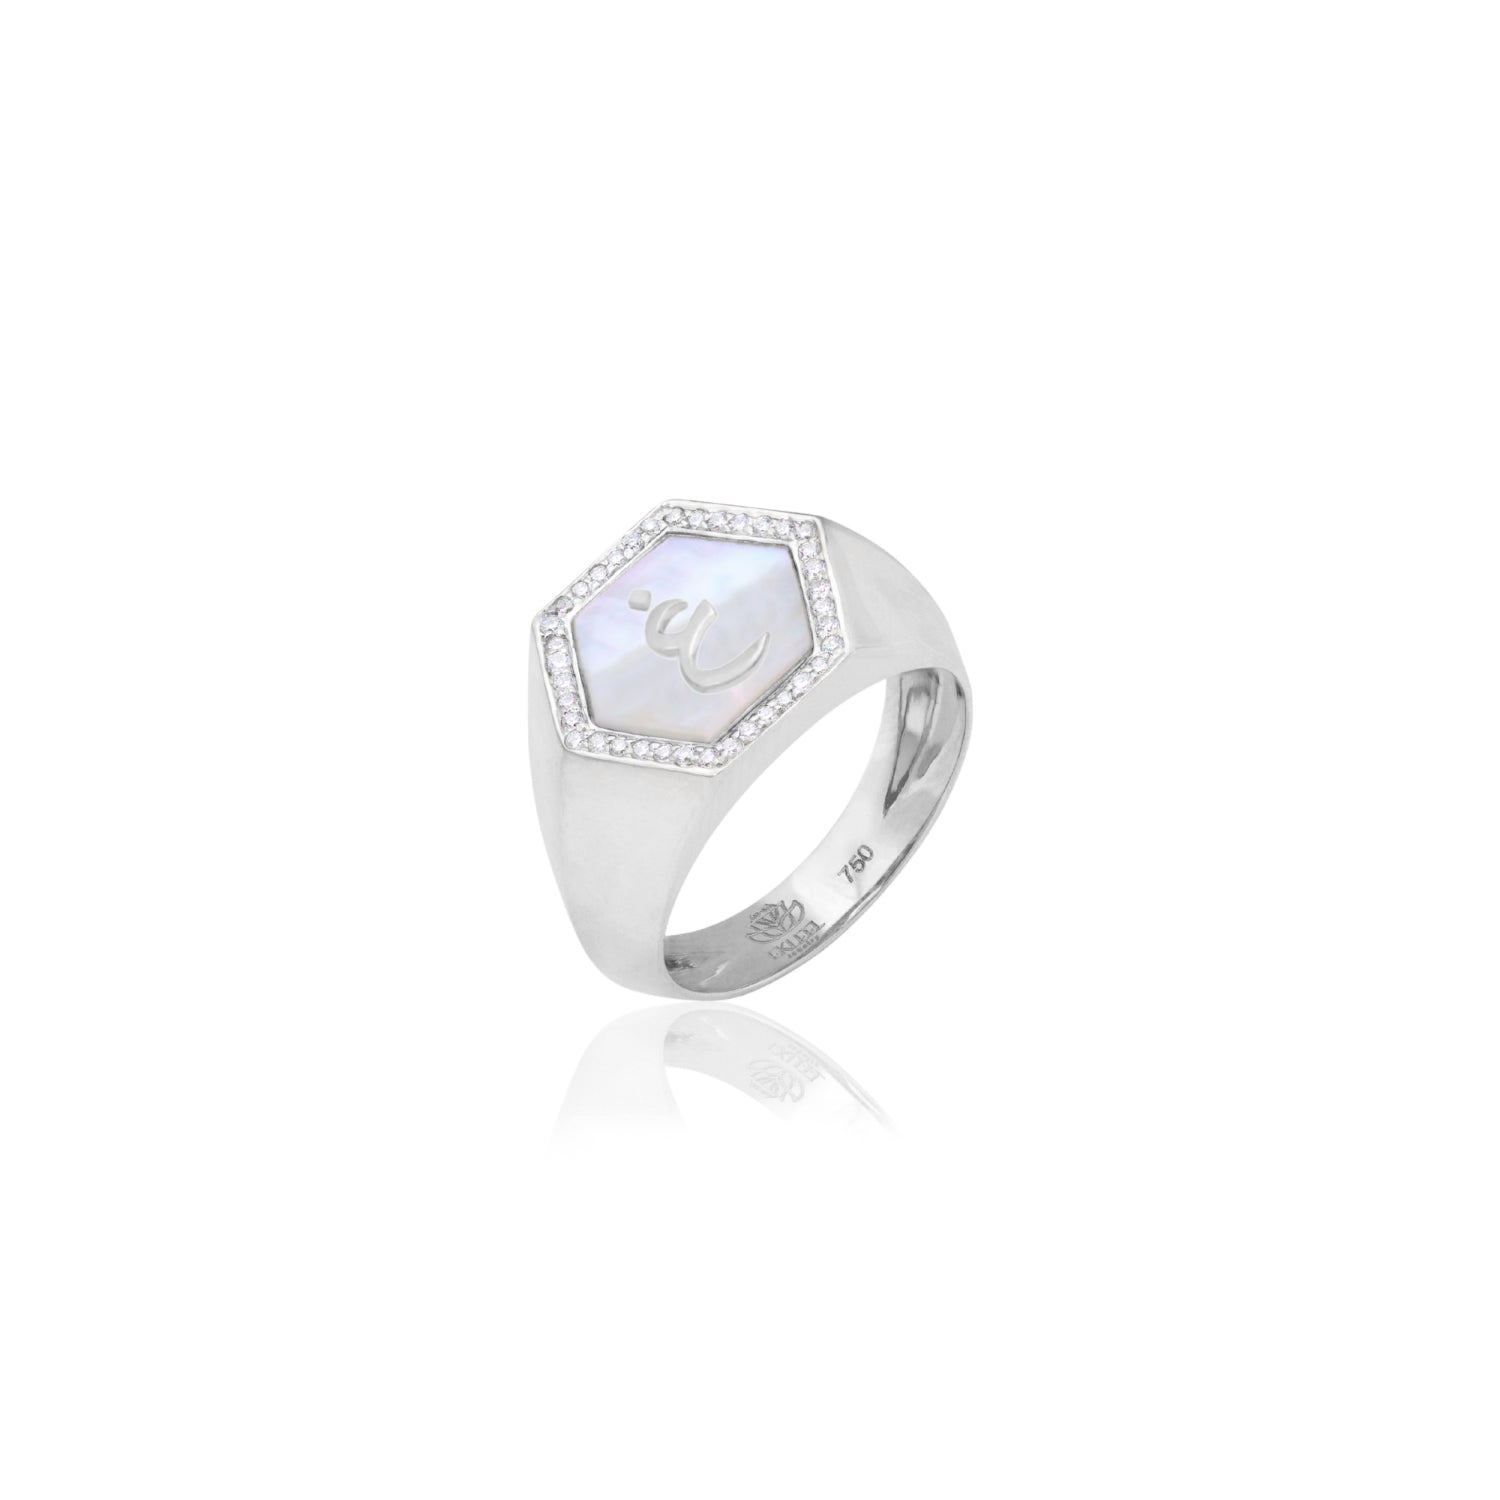 Qamoos 2.0 Letter غ White Mother of Pearl and Diamond Signet Ring in White Gold